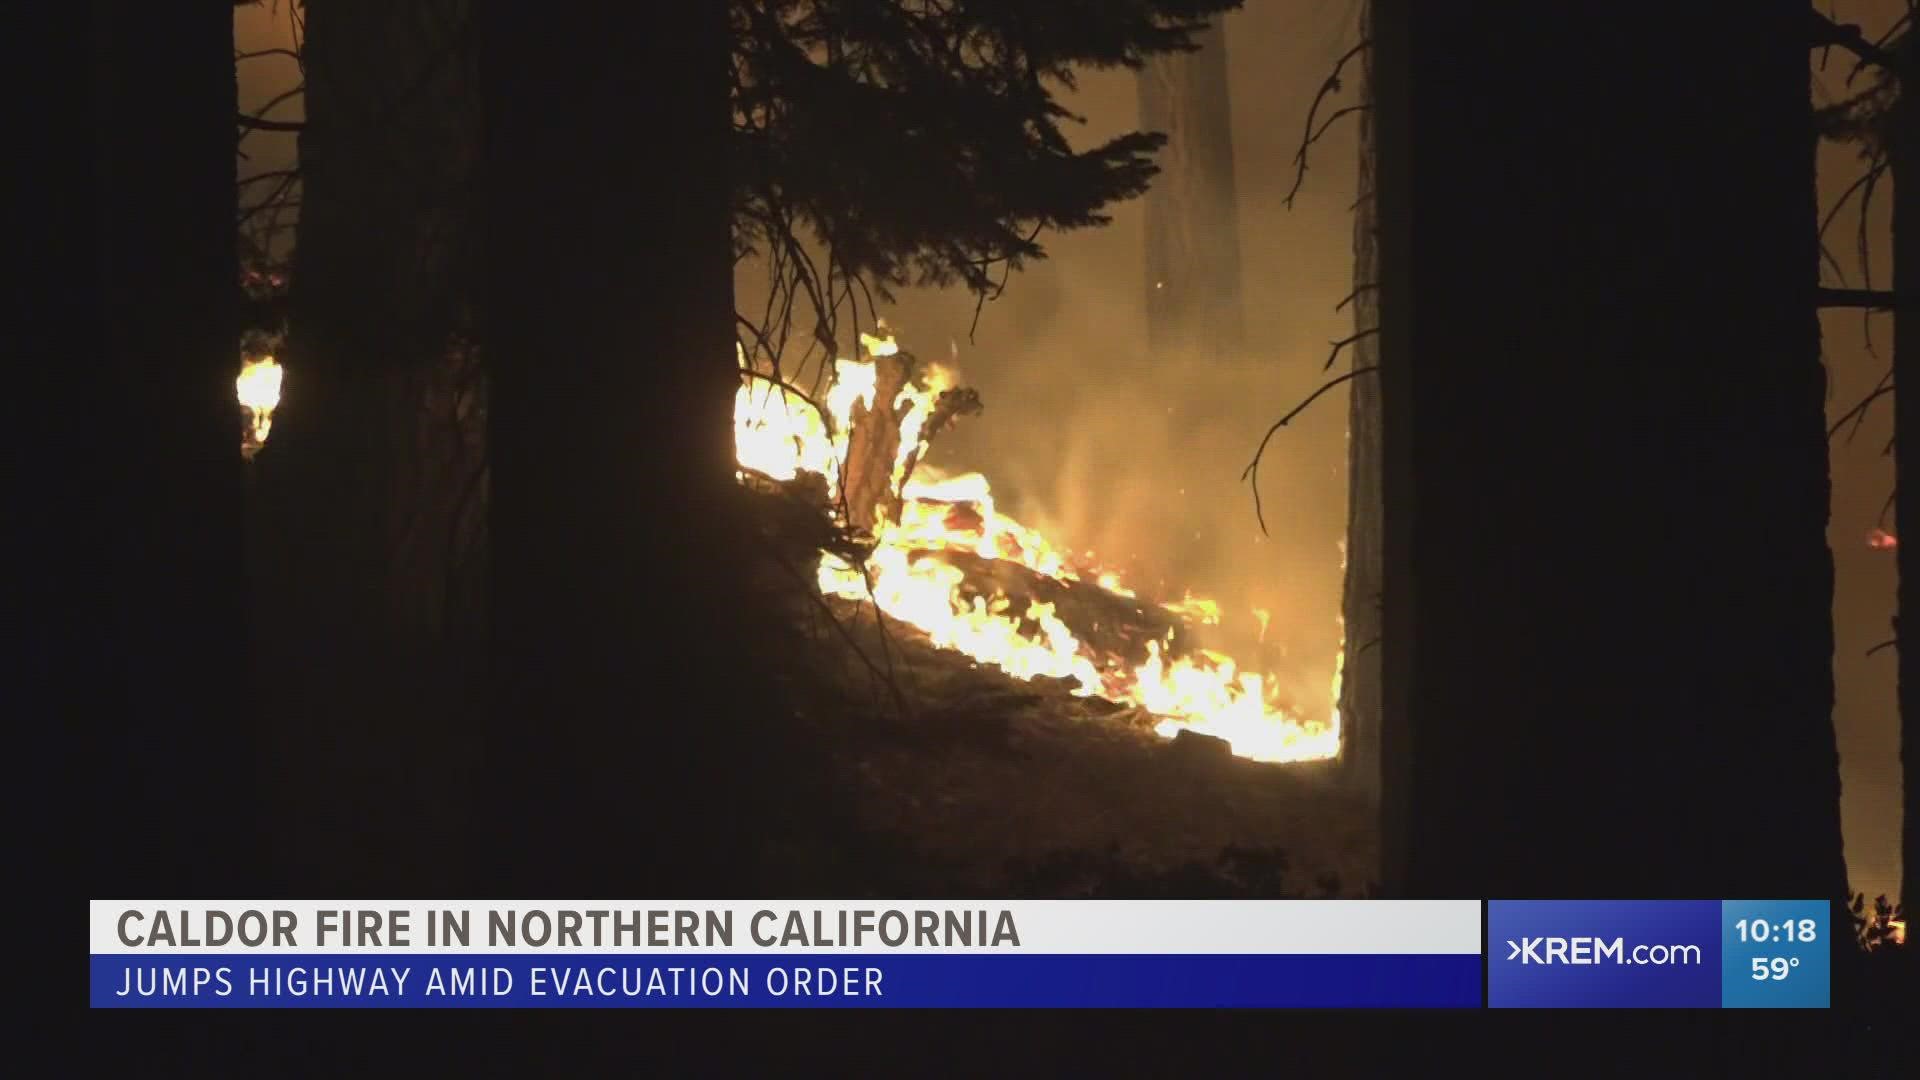 KREM 2's Joshua Robinson and Jeff Bollinger are covering the fire in South Lake Tahoe.